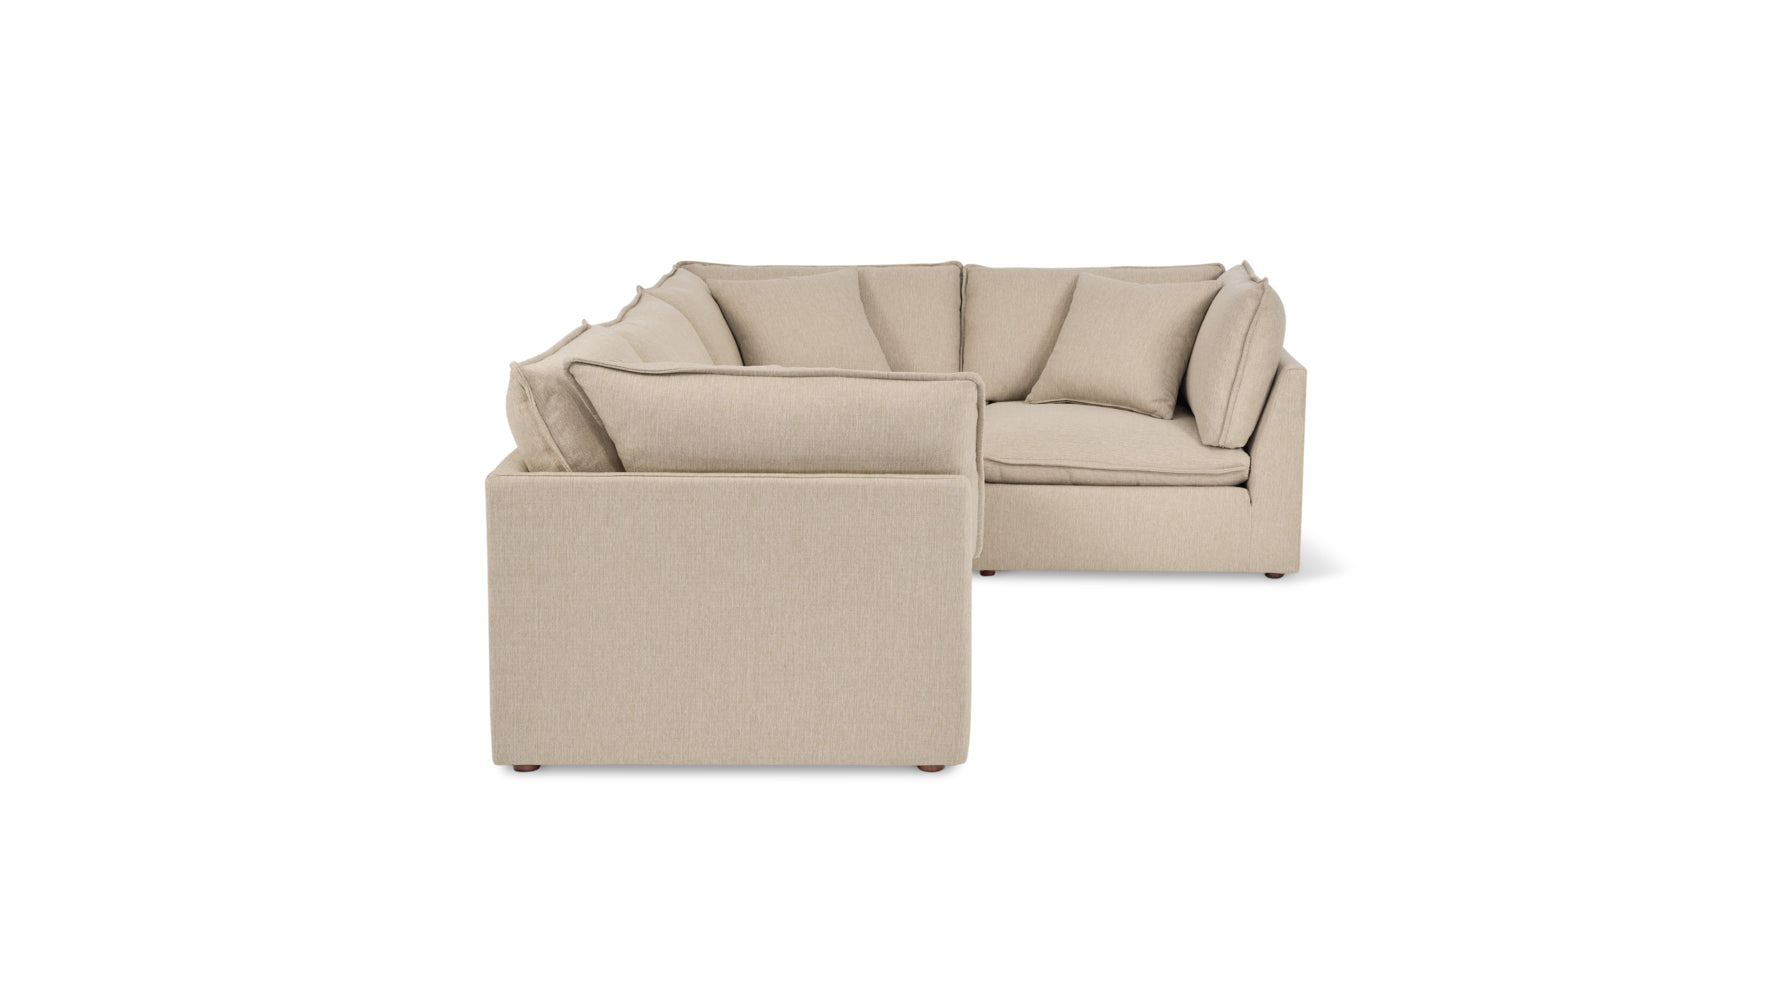 Chill Time 4-Piece Modular Sectional Closed, Biscuit - Image 3